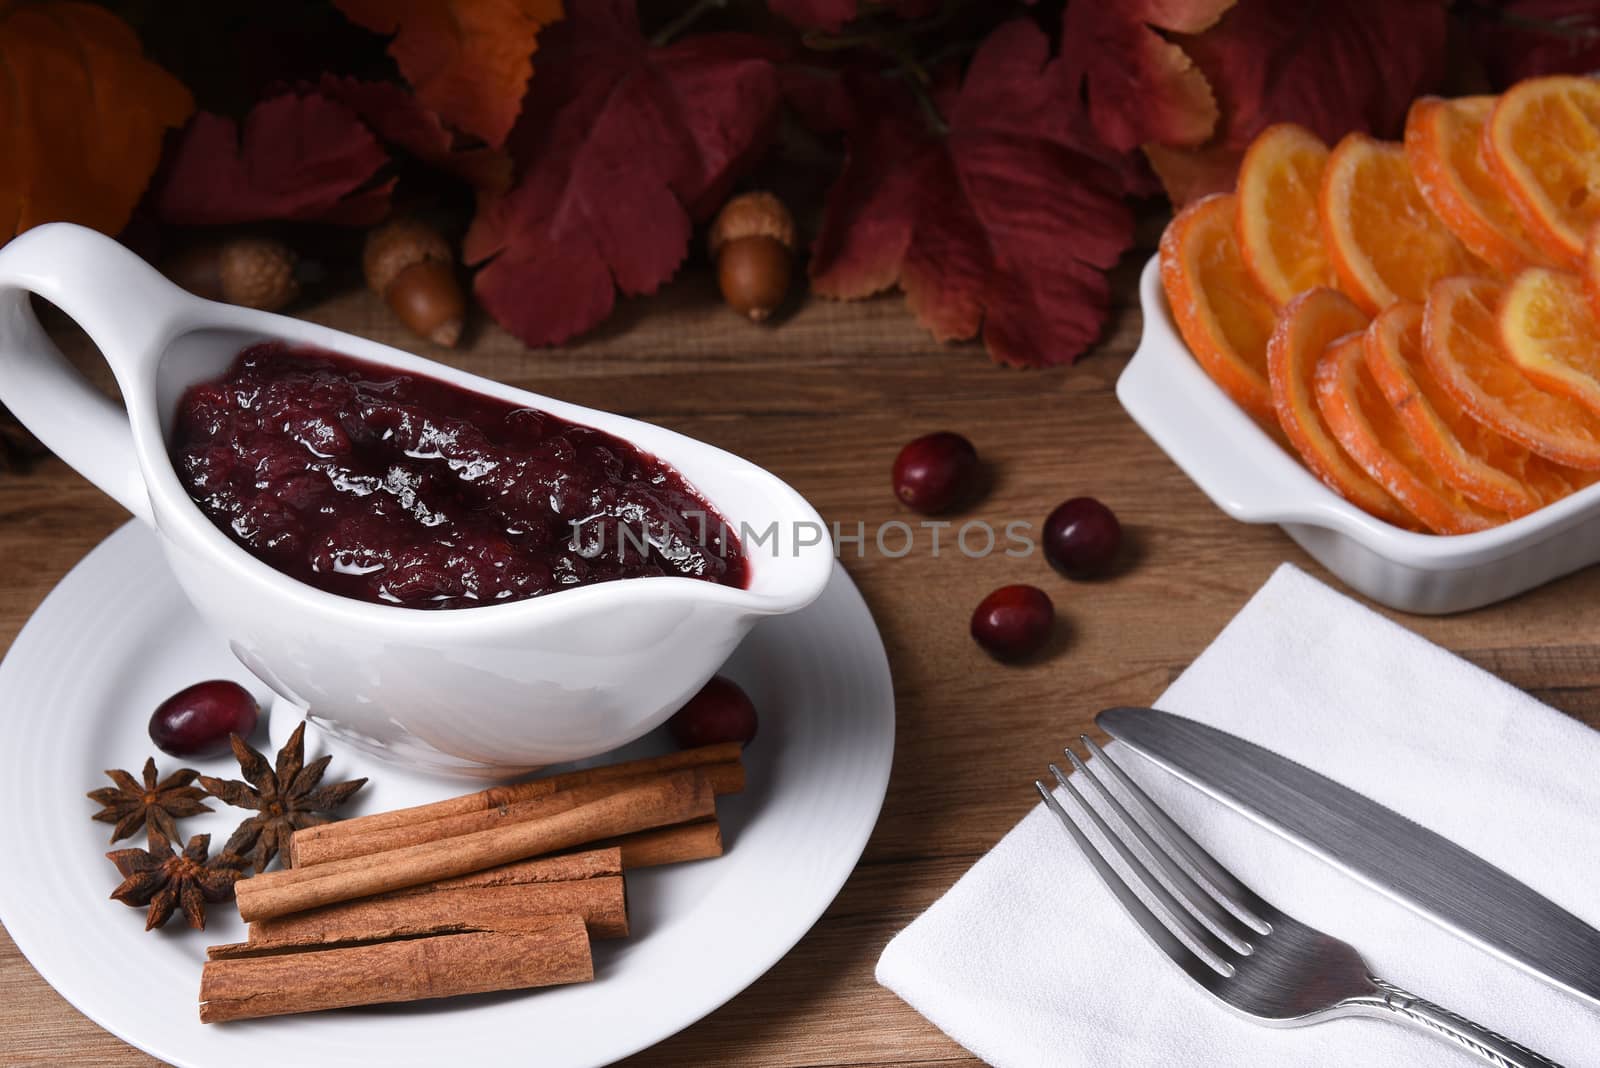 Cranberry Sauce on Thanksgiving Table by sCukrov